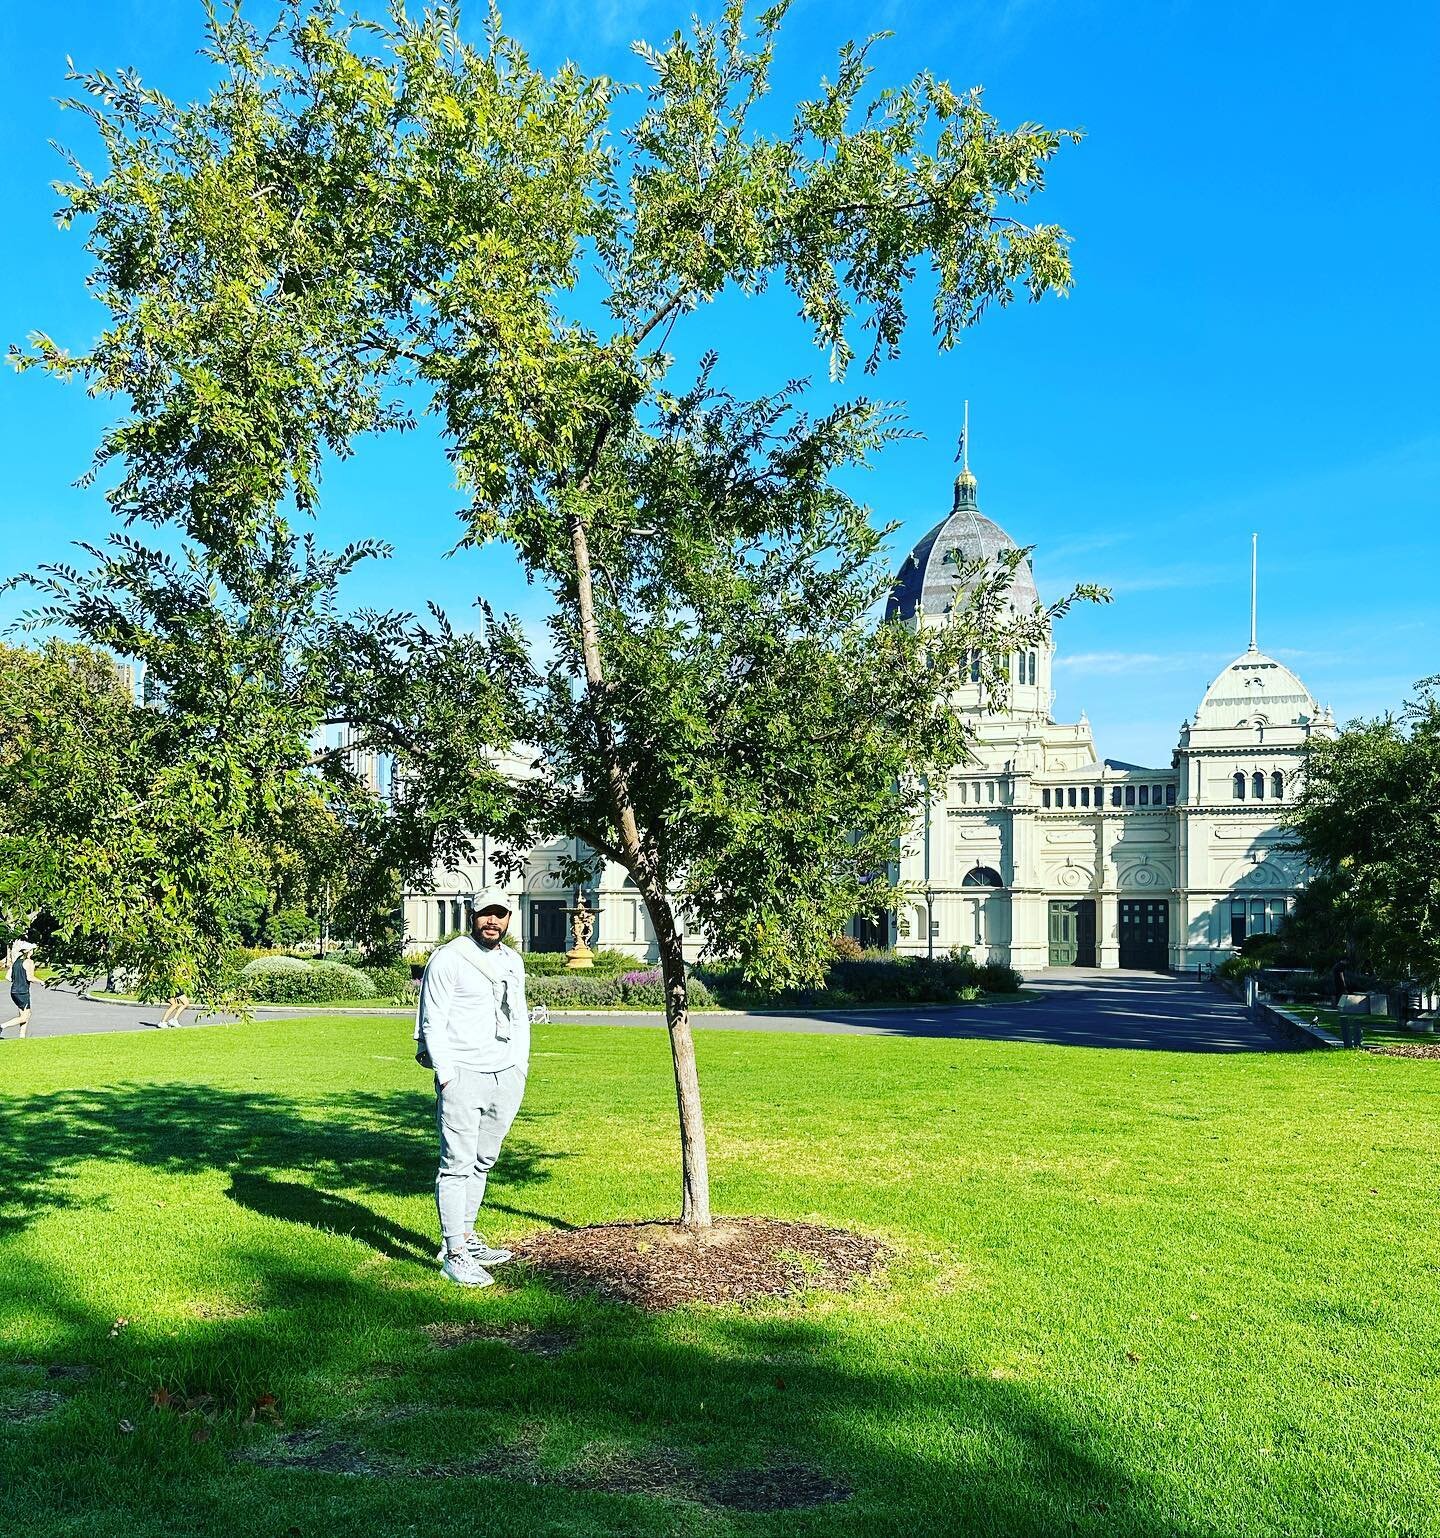 A proud tree Dad. Eddie planted this tree 2 years ago outside the Royal Exhibition Building. Had to go and past and check on its growth

#thetreetrimmers #qualifiedarborist #arborist #morningtonpeninsula #melbourne #victoria #treeclimber #skilledtrad